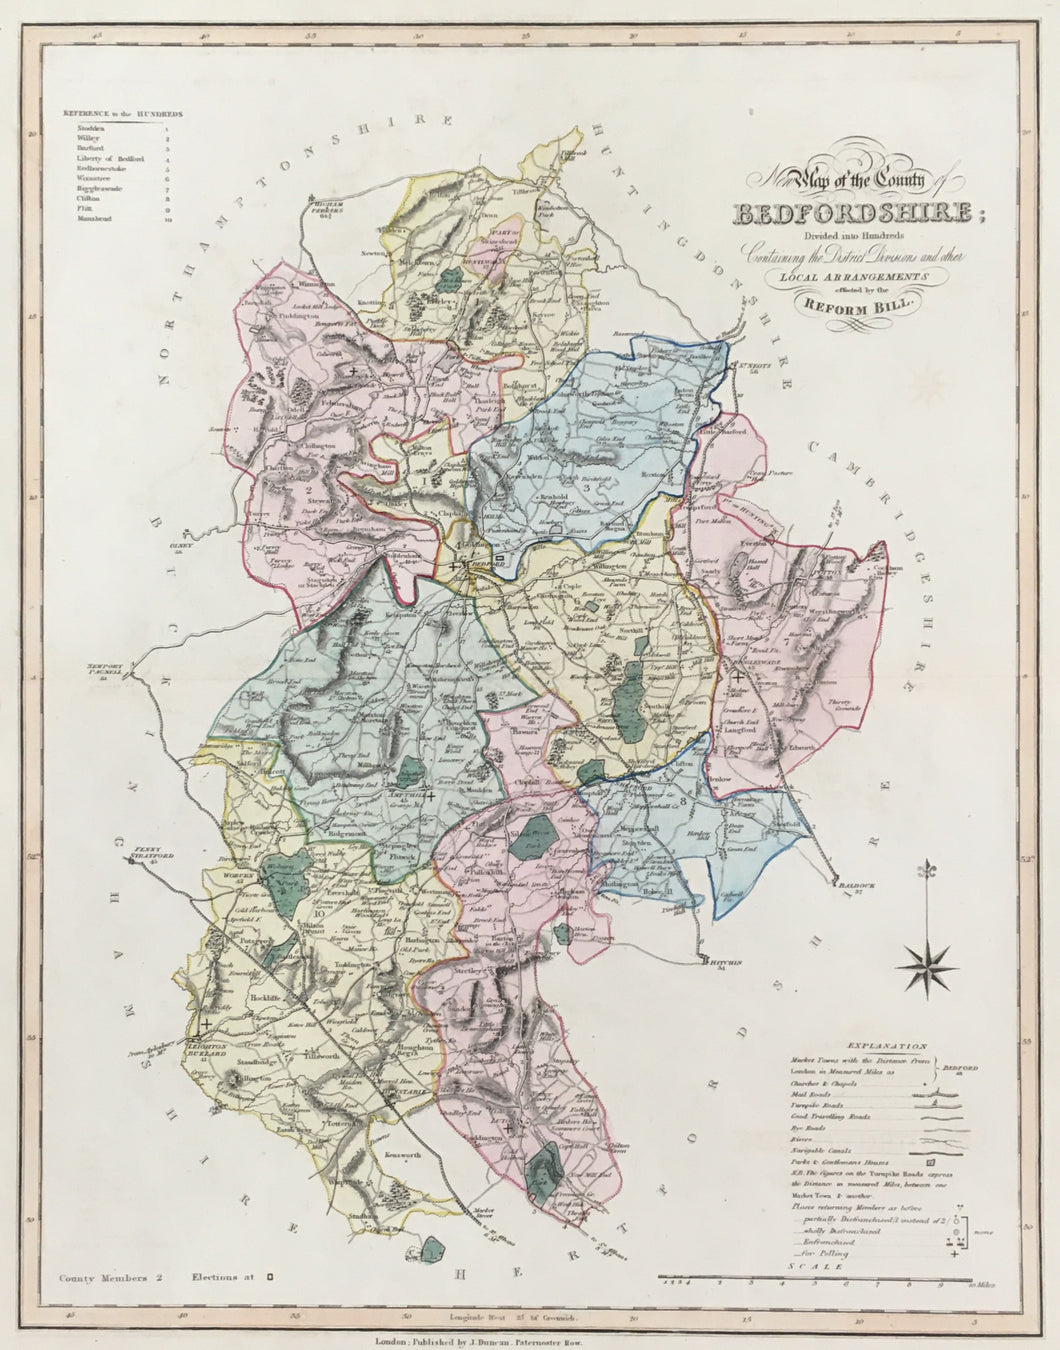 Ebden, William “New Map of the County of Bedfordshire”